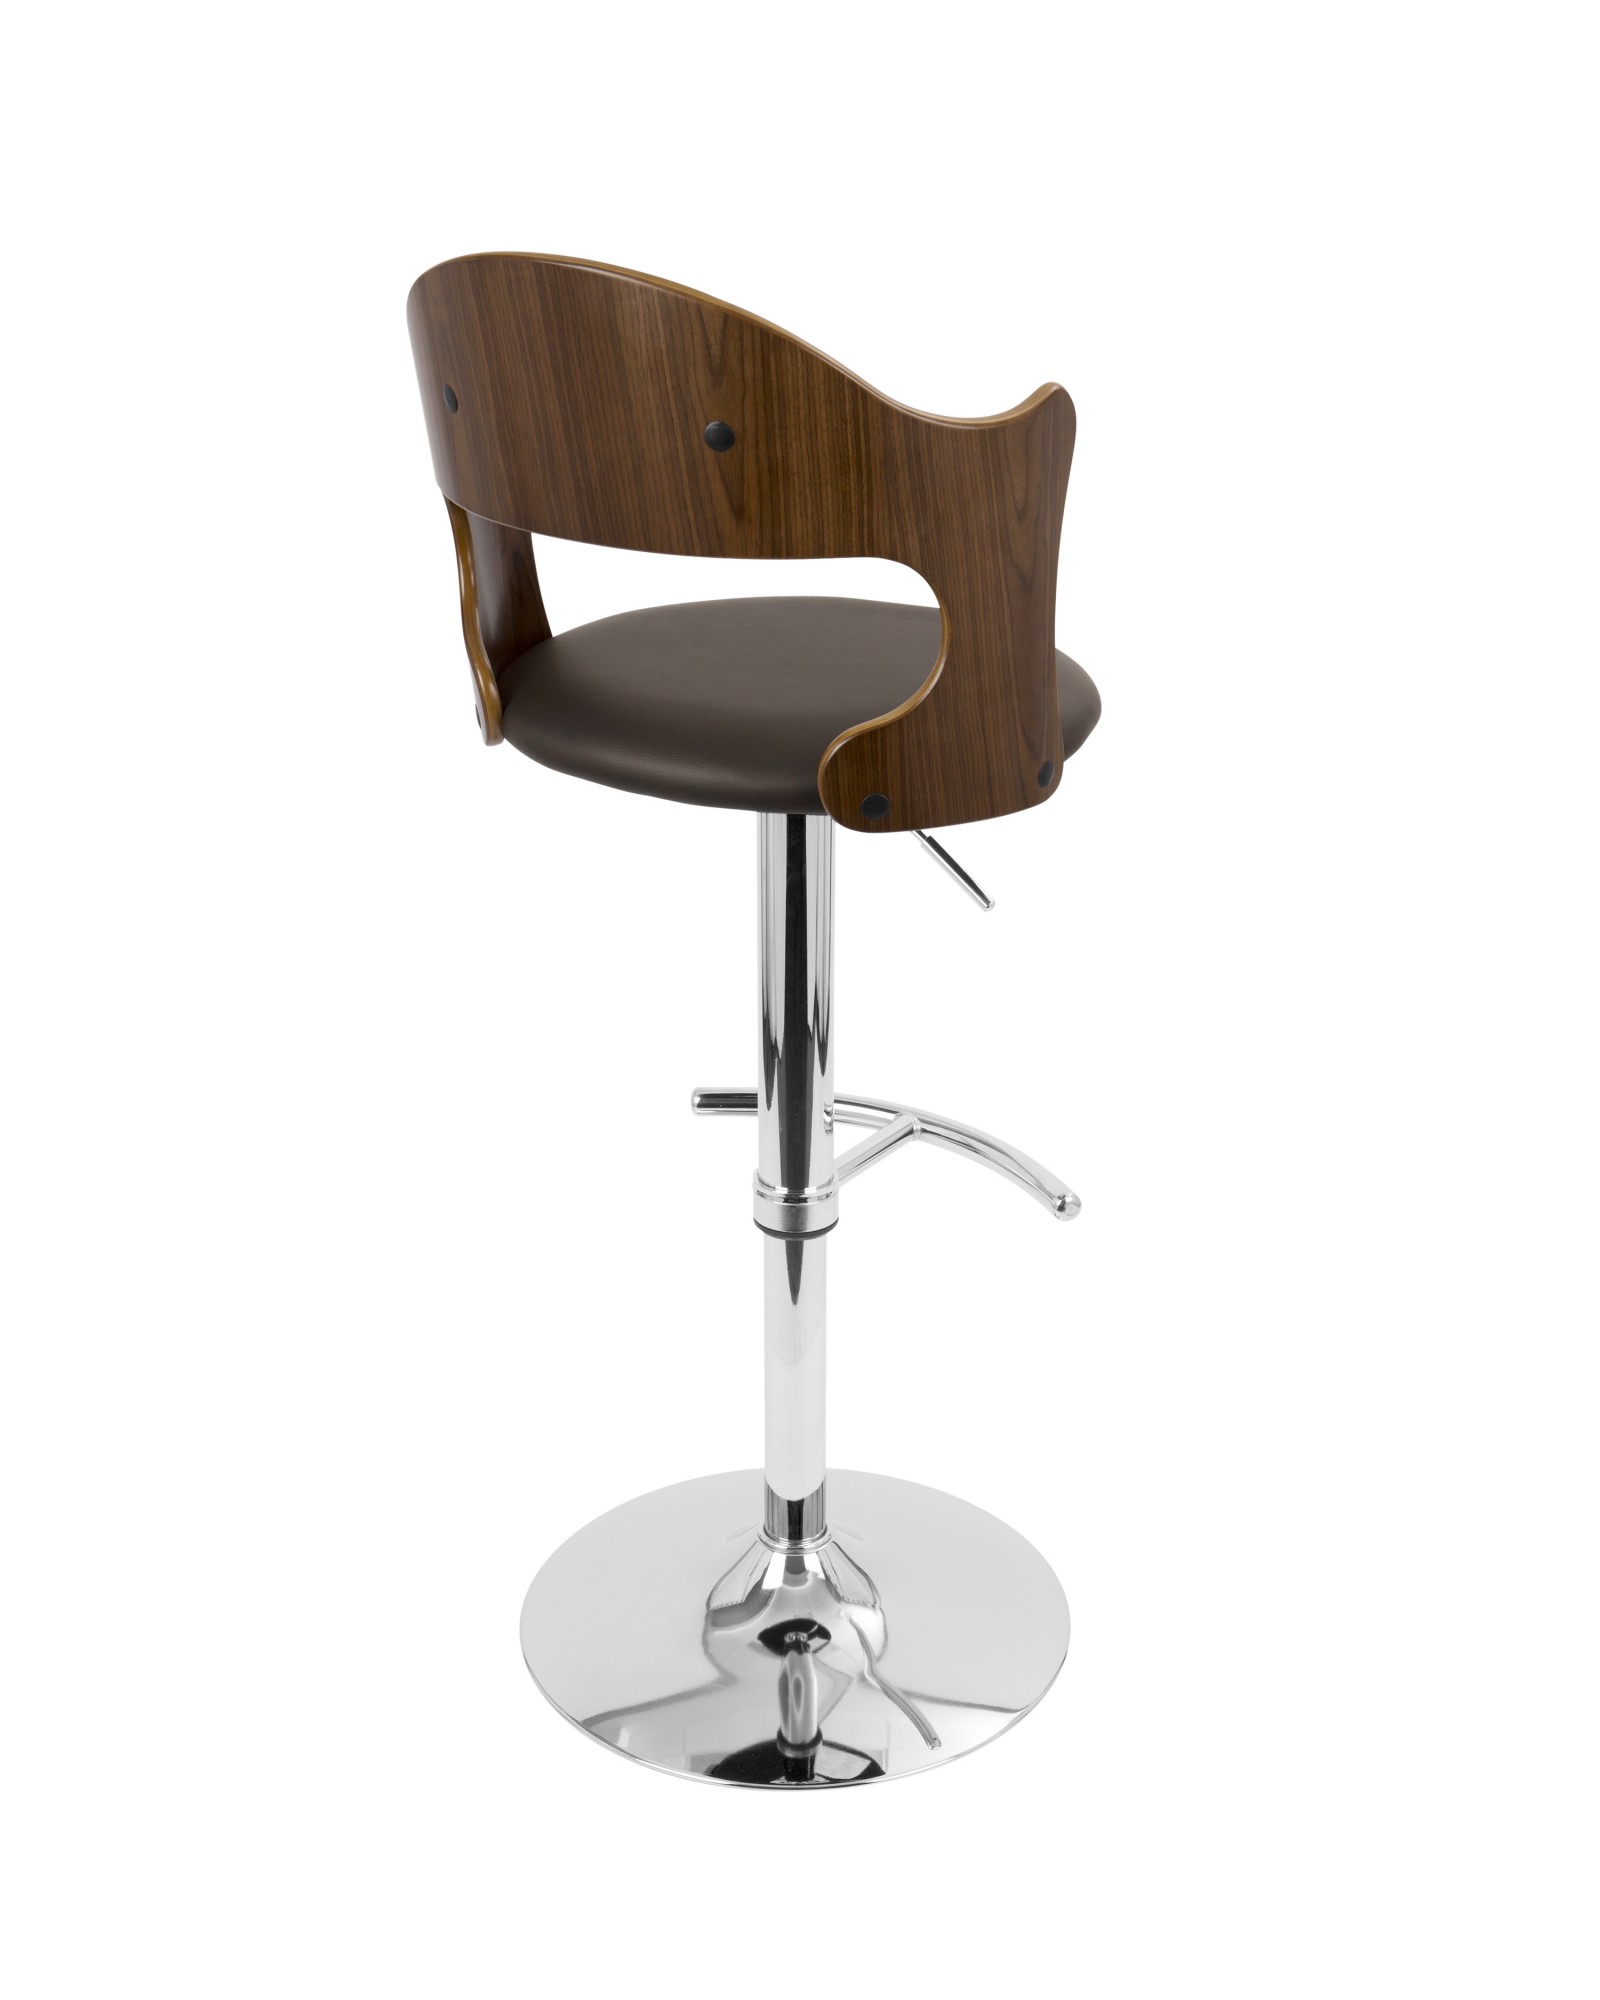 Cello Mid-Century Modern Adjustable Barstool with Swivel in Walnut and Brown Faux Leather